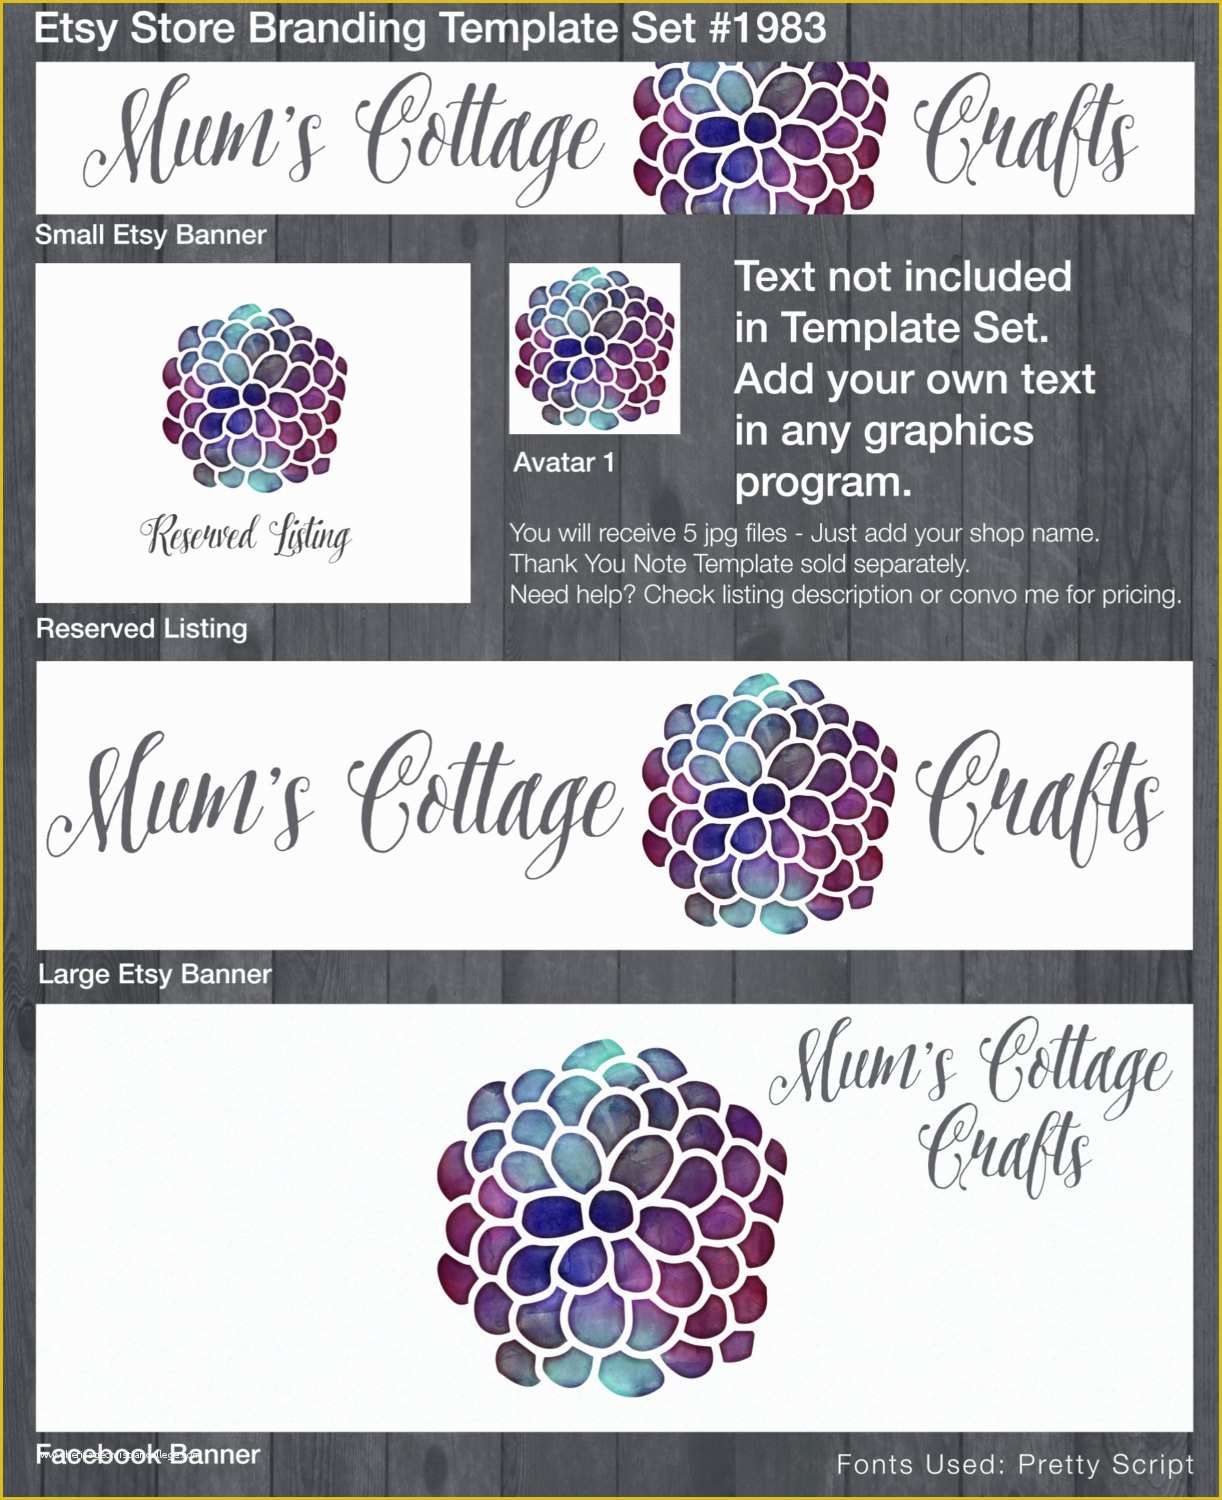 Free Etsy Shop Banner Templates Of Etsy Store Branding Watercolor Collection Diy Template 1983